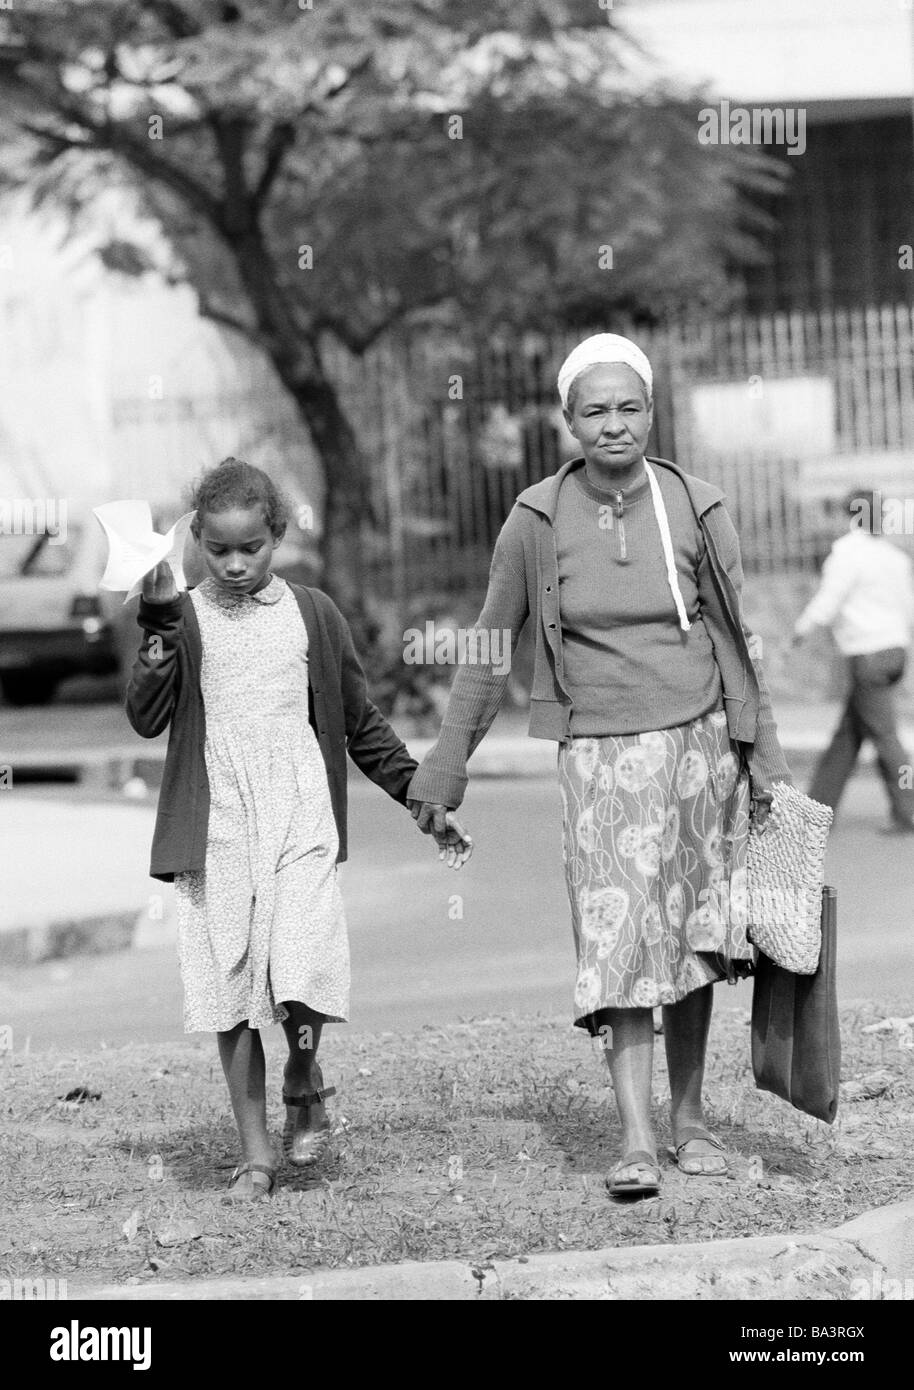 Eighties, black and white photo, people, elder woman and her granddaughter go shopping, aged 60 to 70 years, aged 10 to 12 years, Brazil, Minas Gerais, Belo Horizonte Stock Photo